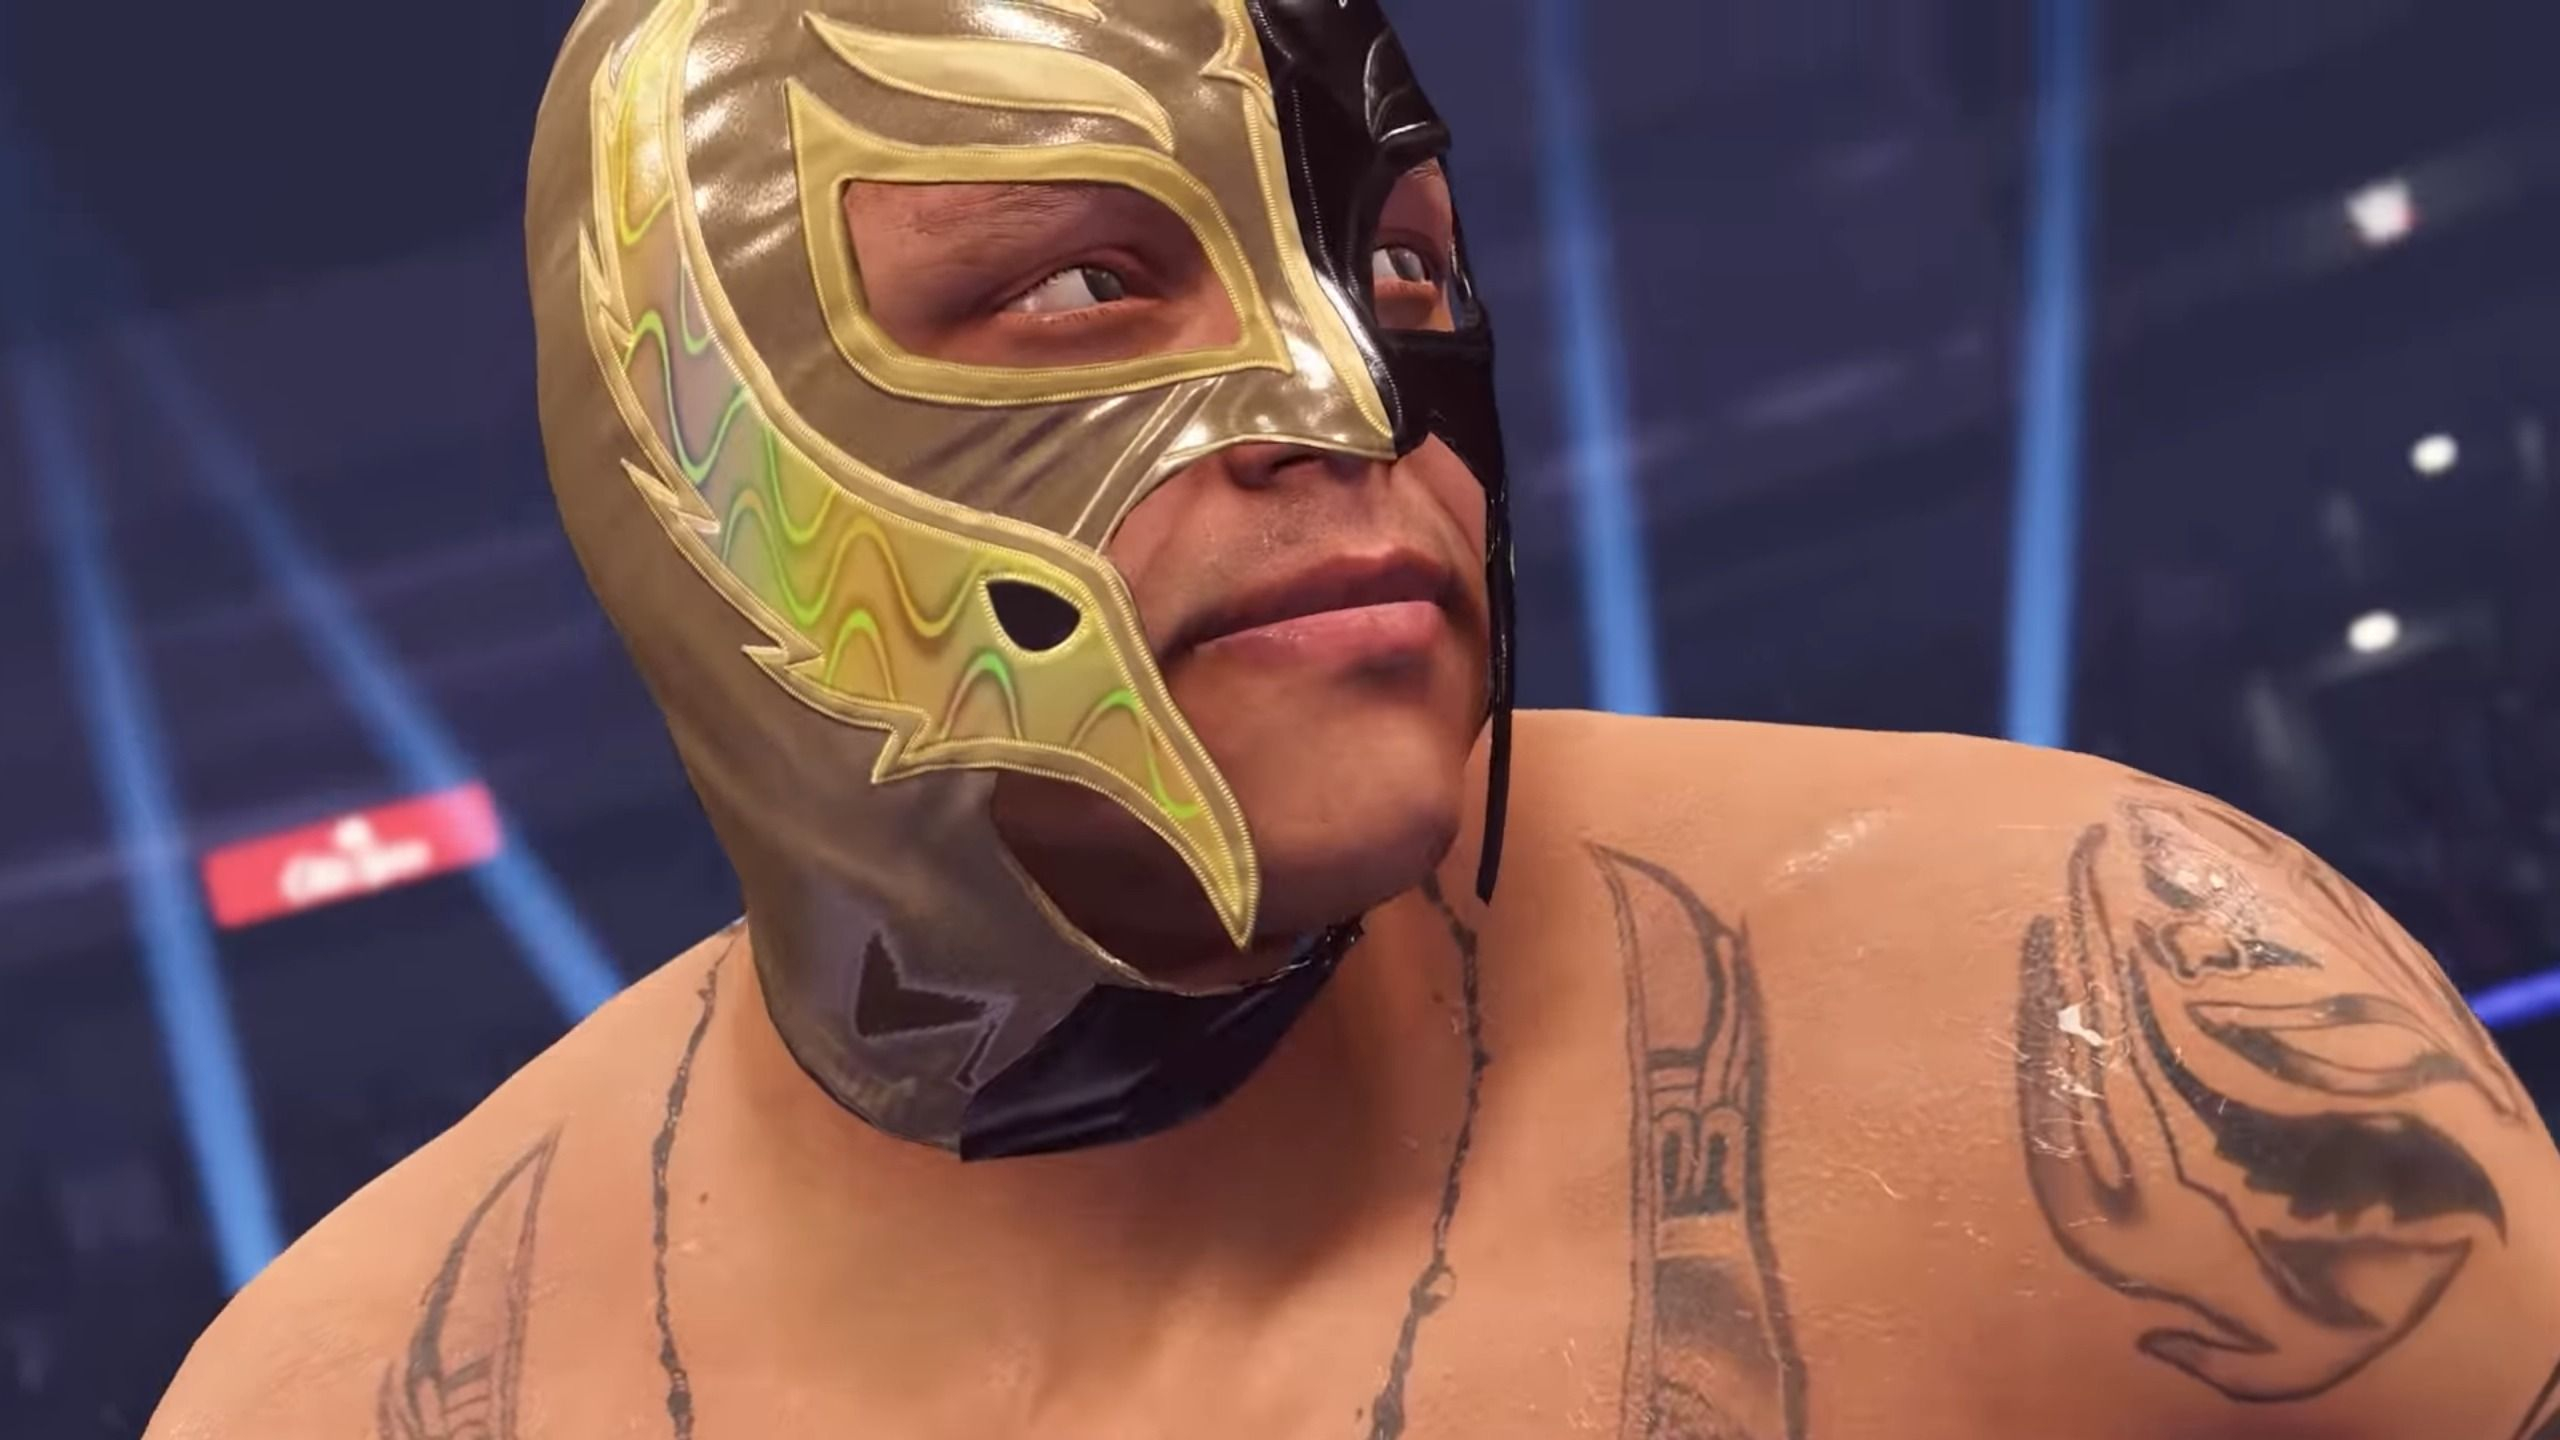 2560x1440 WWE 2K22 Gets New Trailer All About Rey Mysterio And Your Own Character